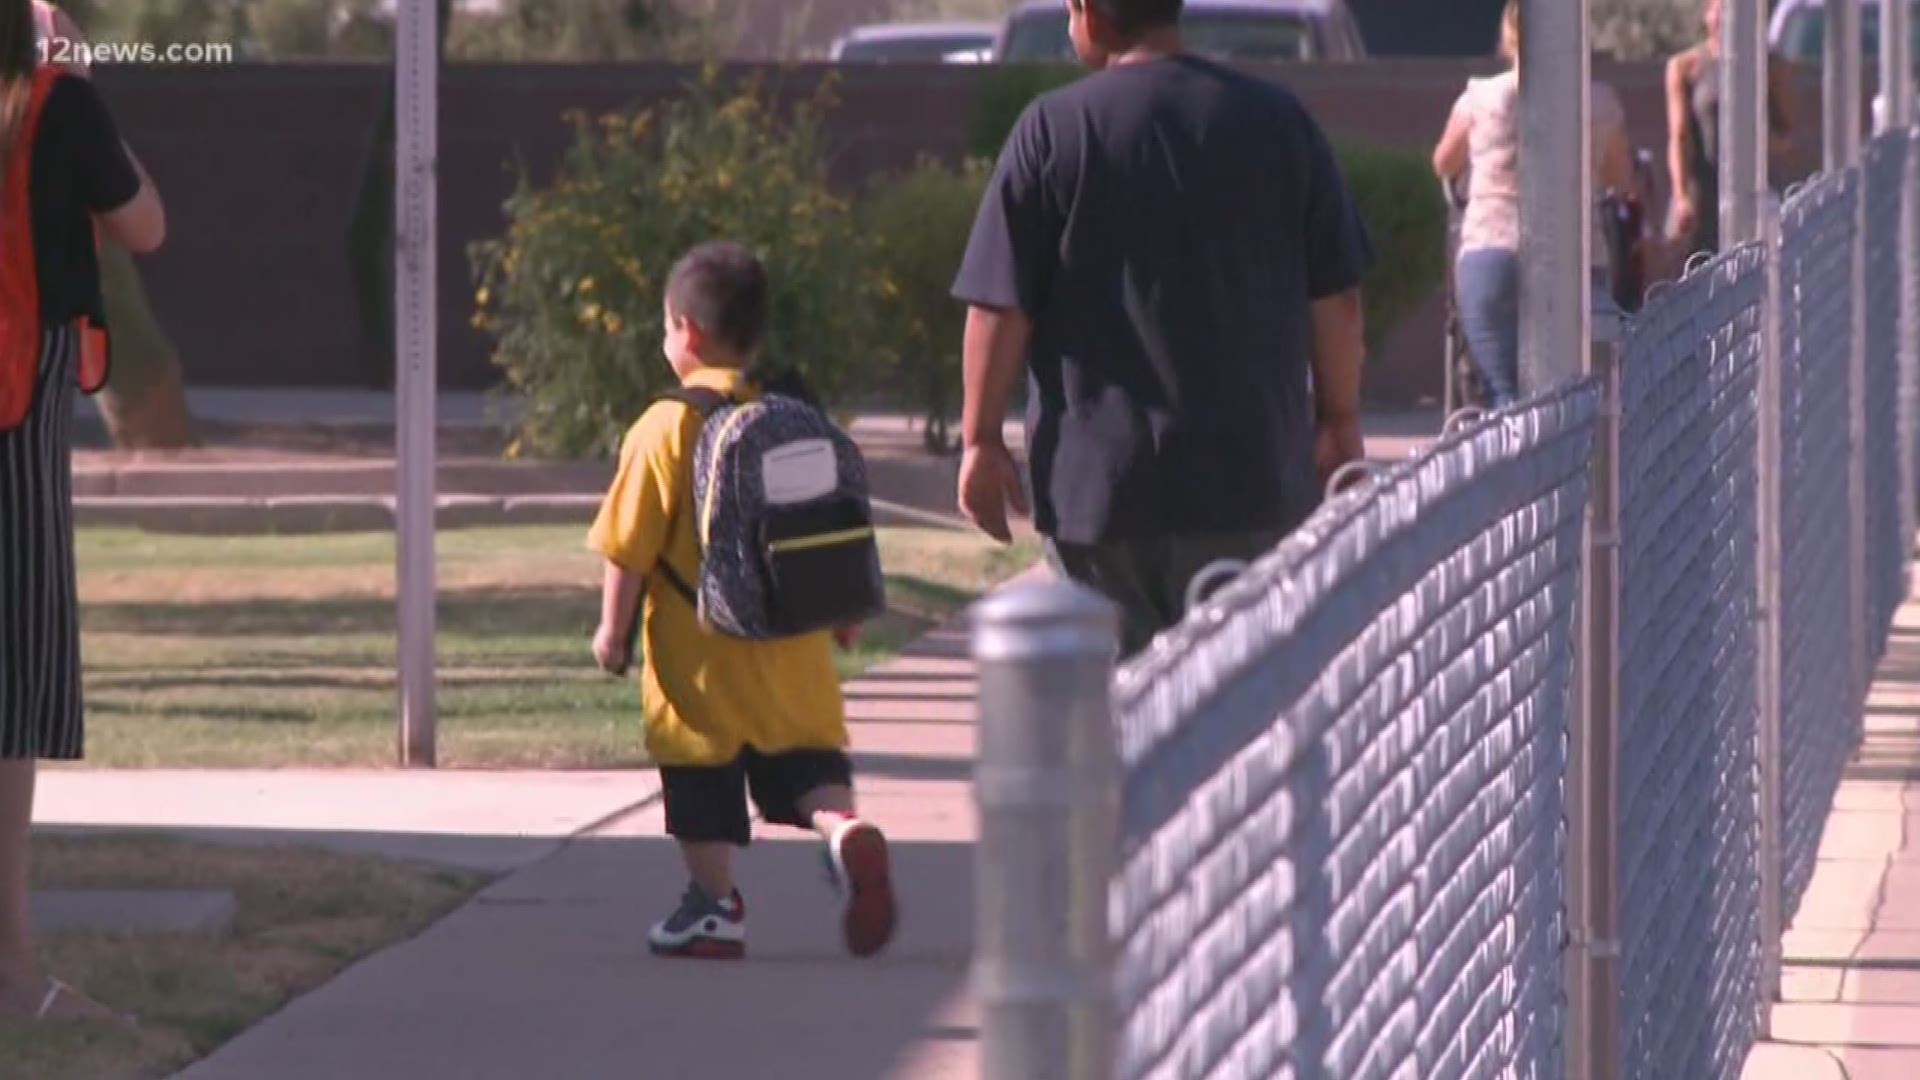 Kids are heading back to classrooms amid excessive heat. We take a look at what schools are doing to keep your kids safe from the high temps.